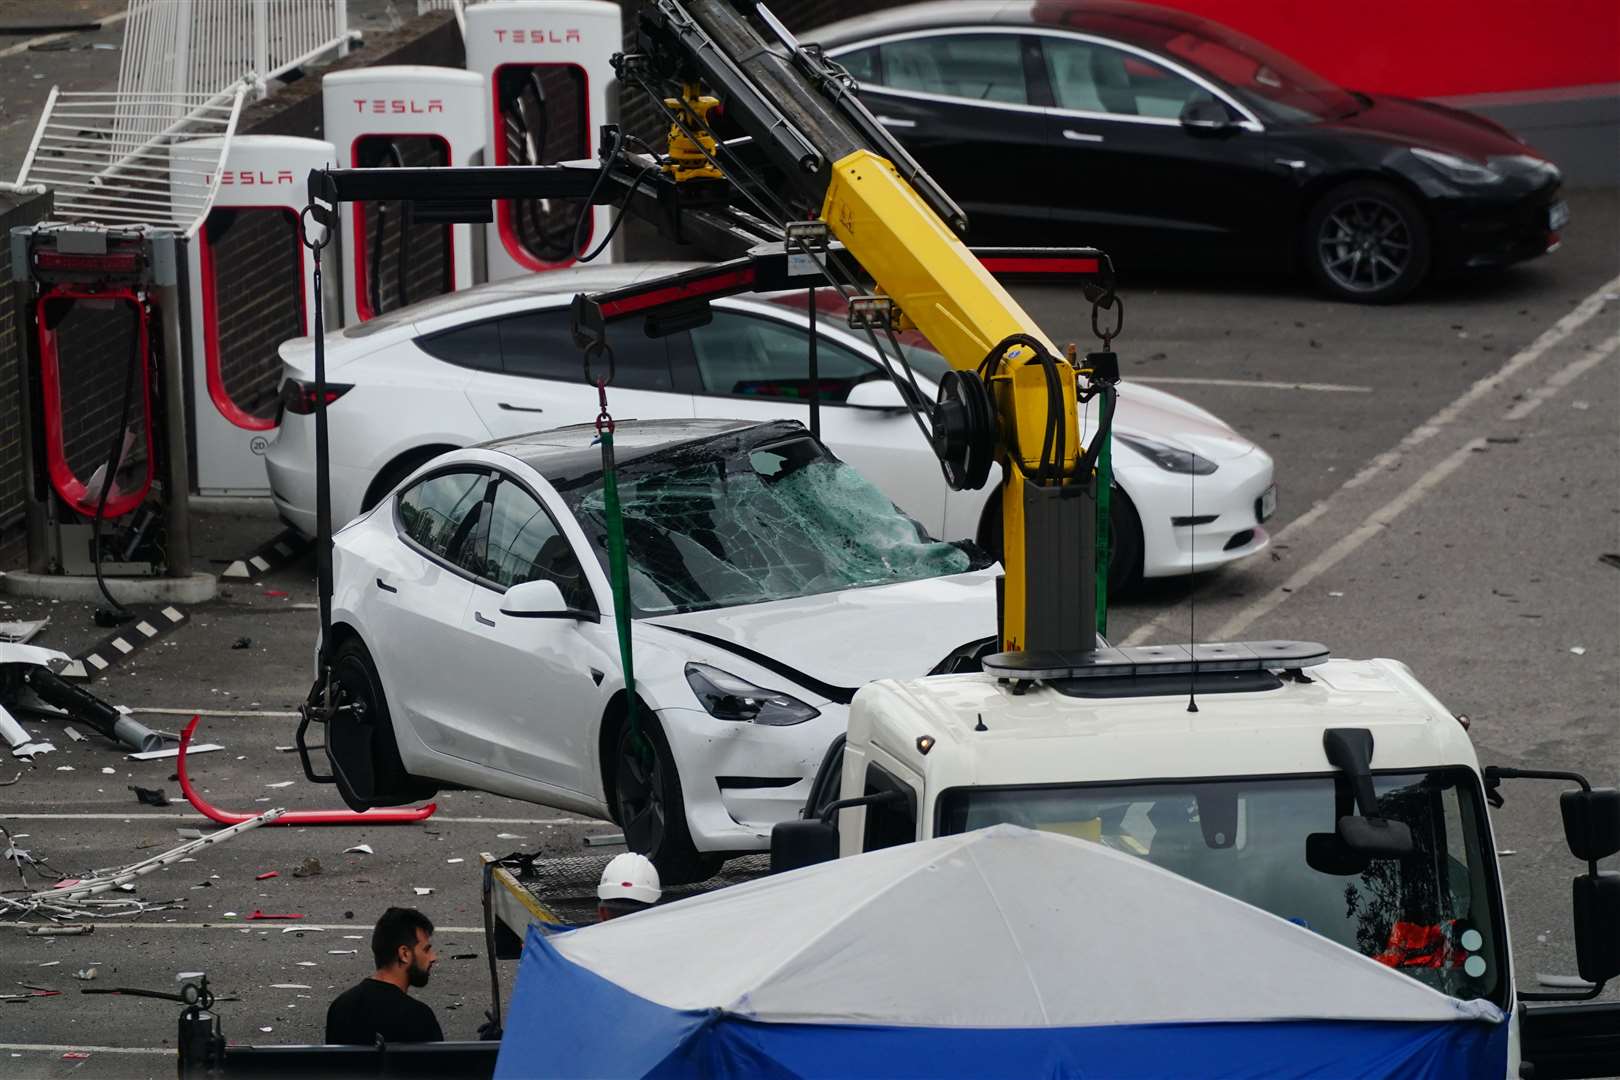 A damaged Tesla car is removed from the scene (Victoria Jones/PA)